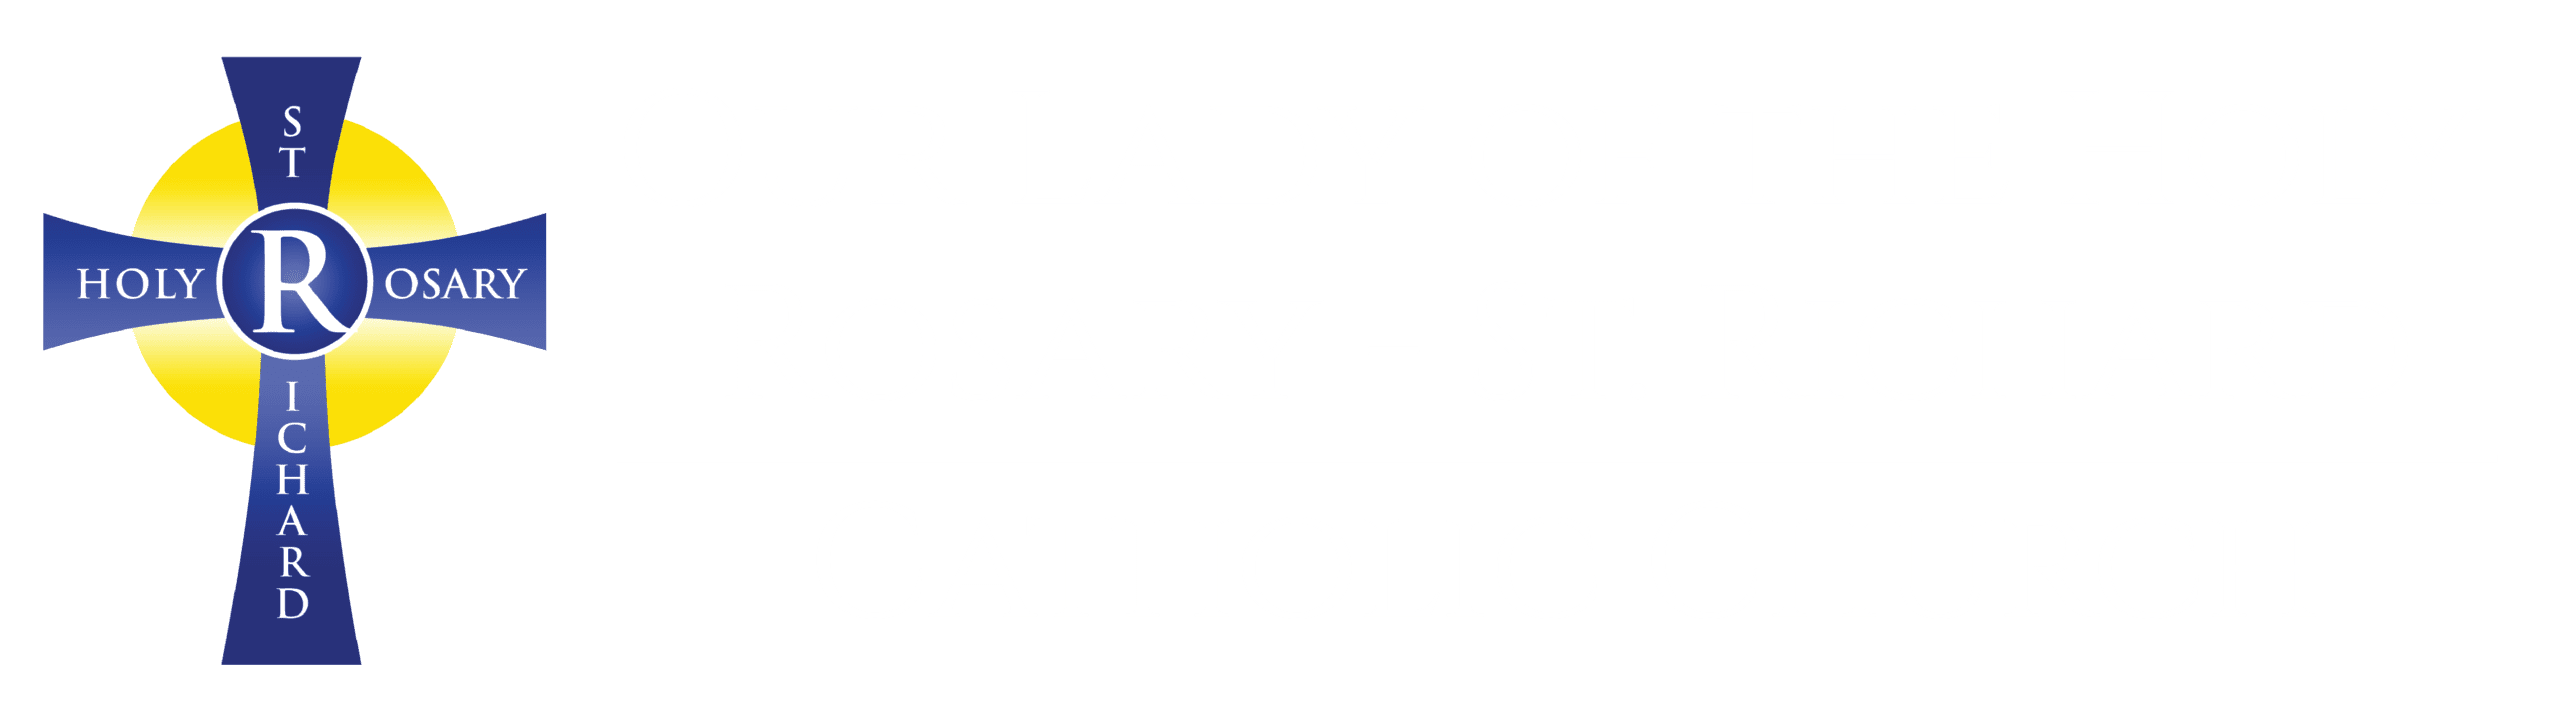 News & Events Our Lady of the Holy Rosary St. Richard